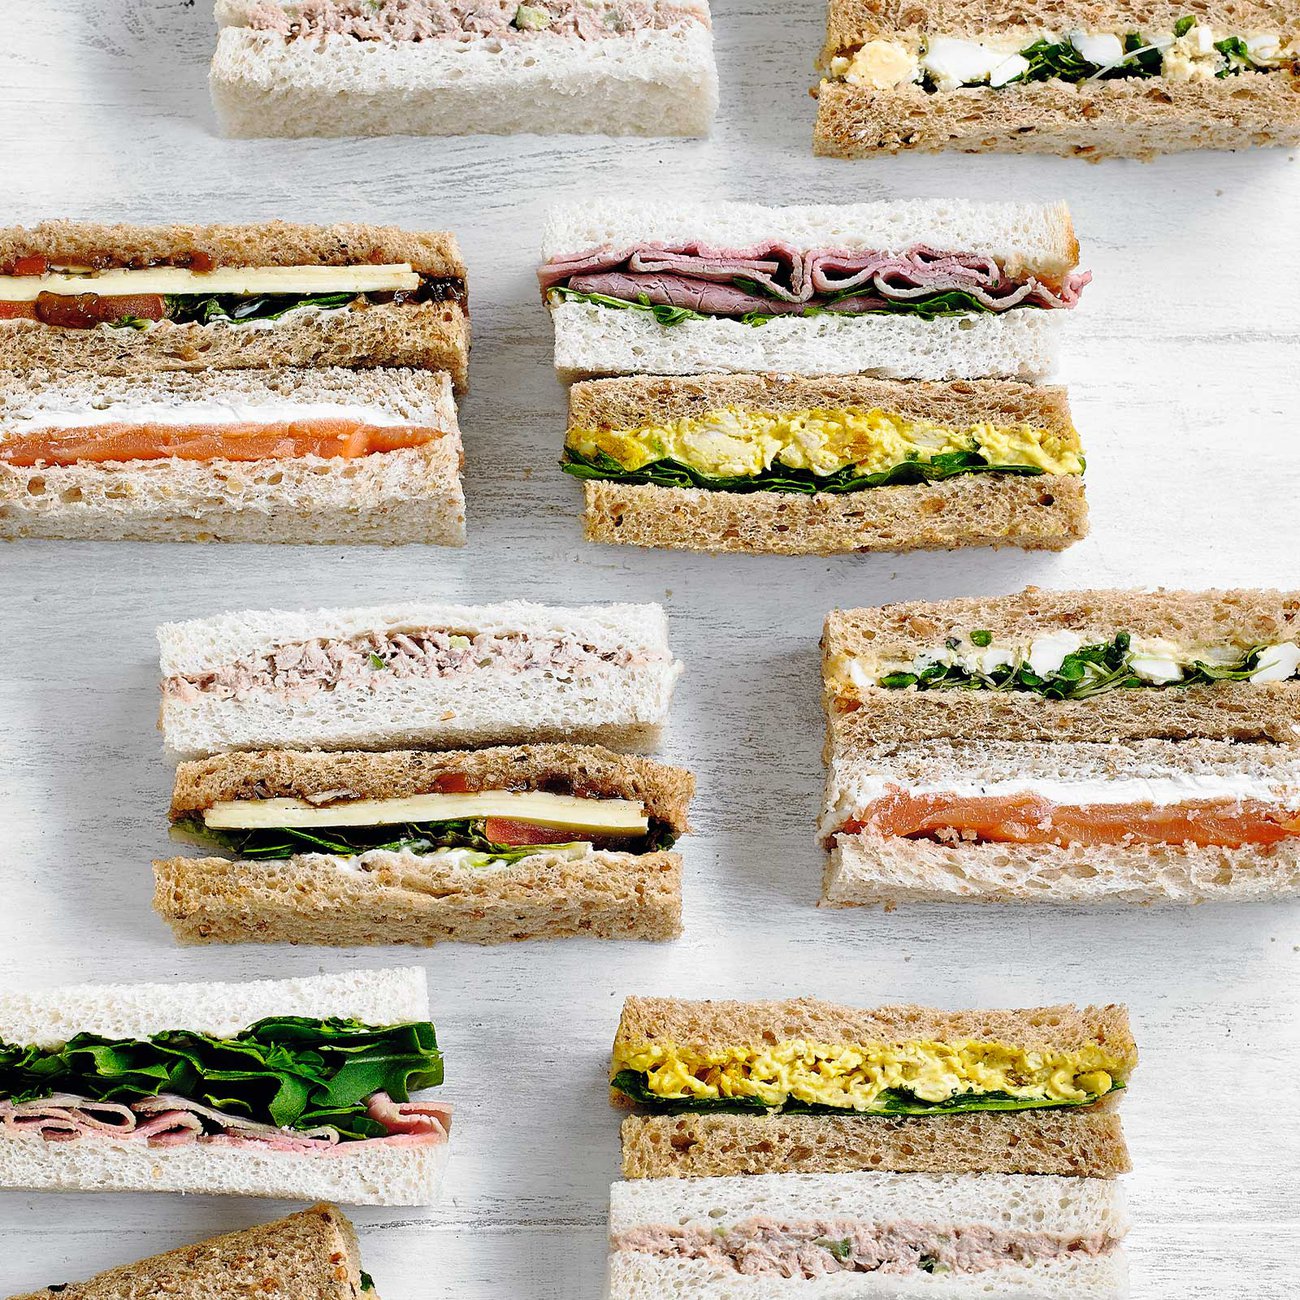 Finger sandwiches allow for a variety of flavours